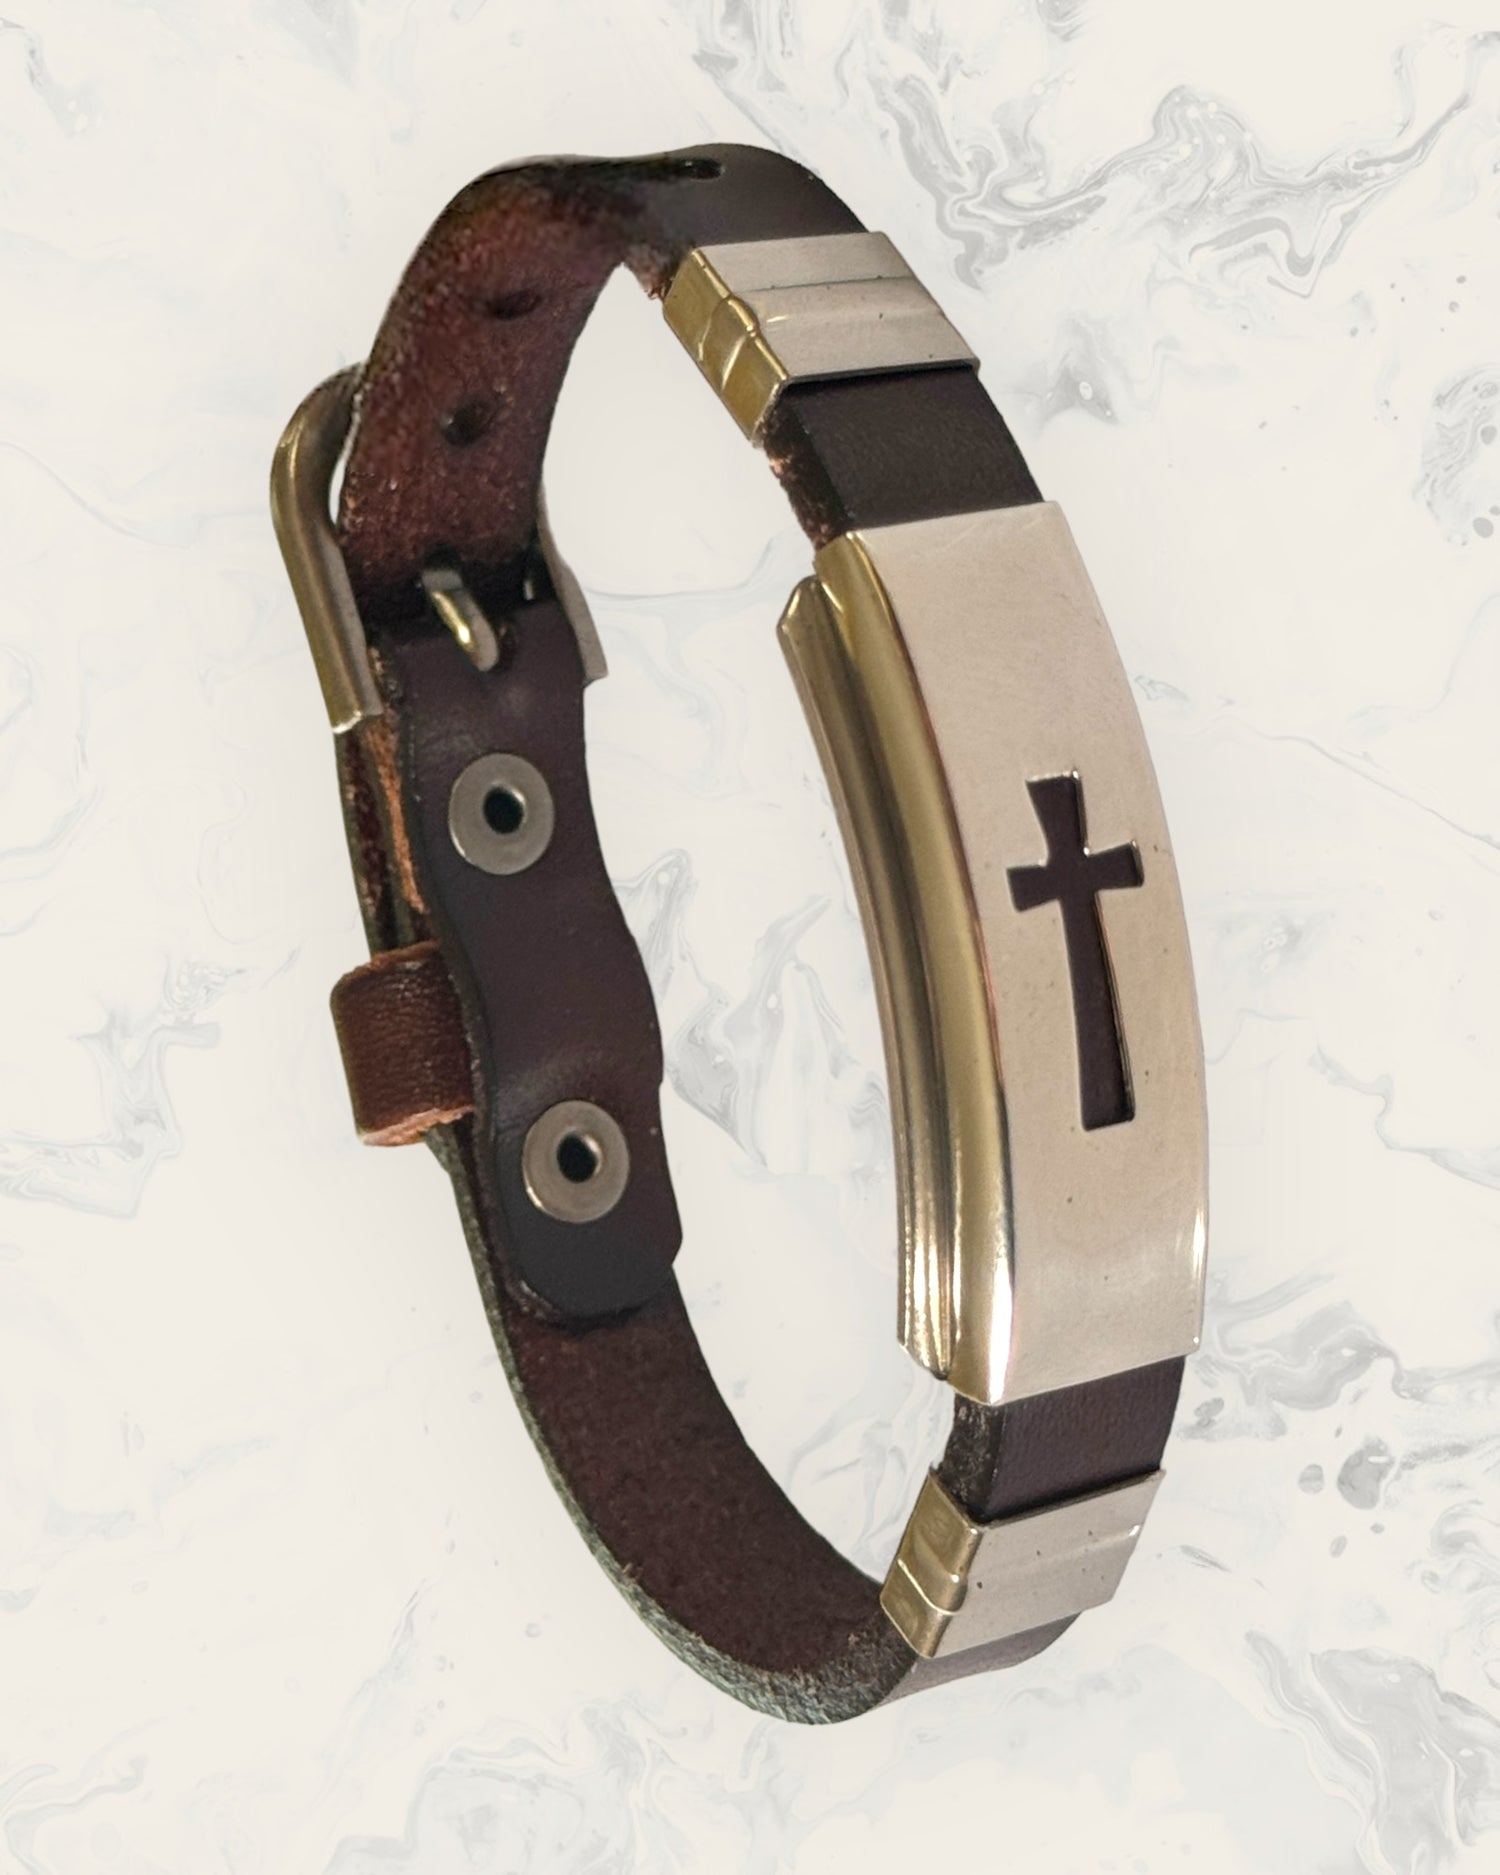 Frequency Jewelry Natural Pain Relief and EMF Protection Bracelet Leather Band Color Dark Brown with Cross design on a silver metal slider